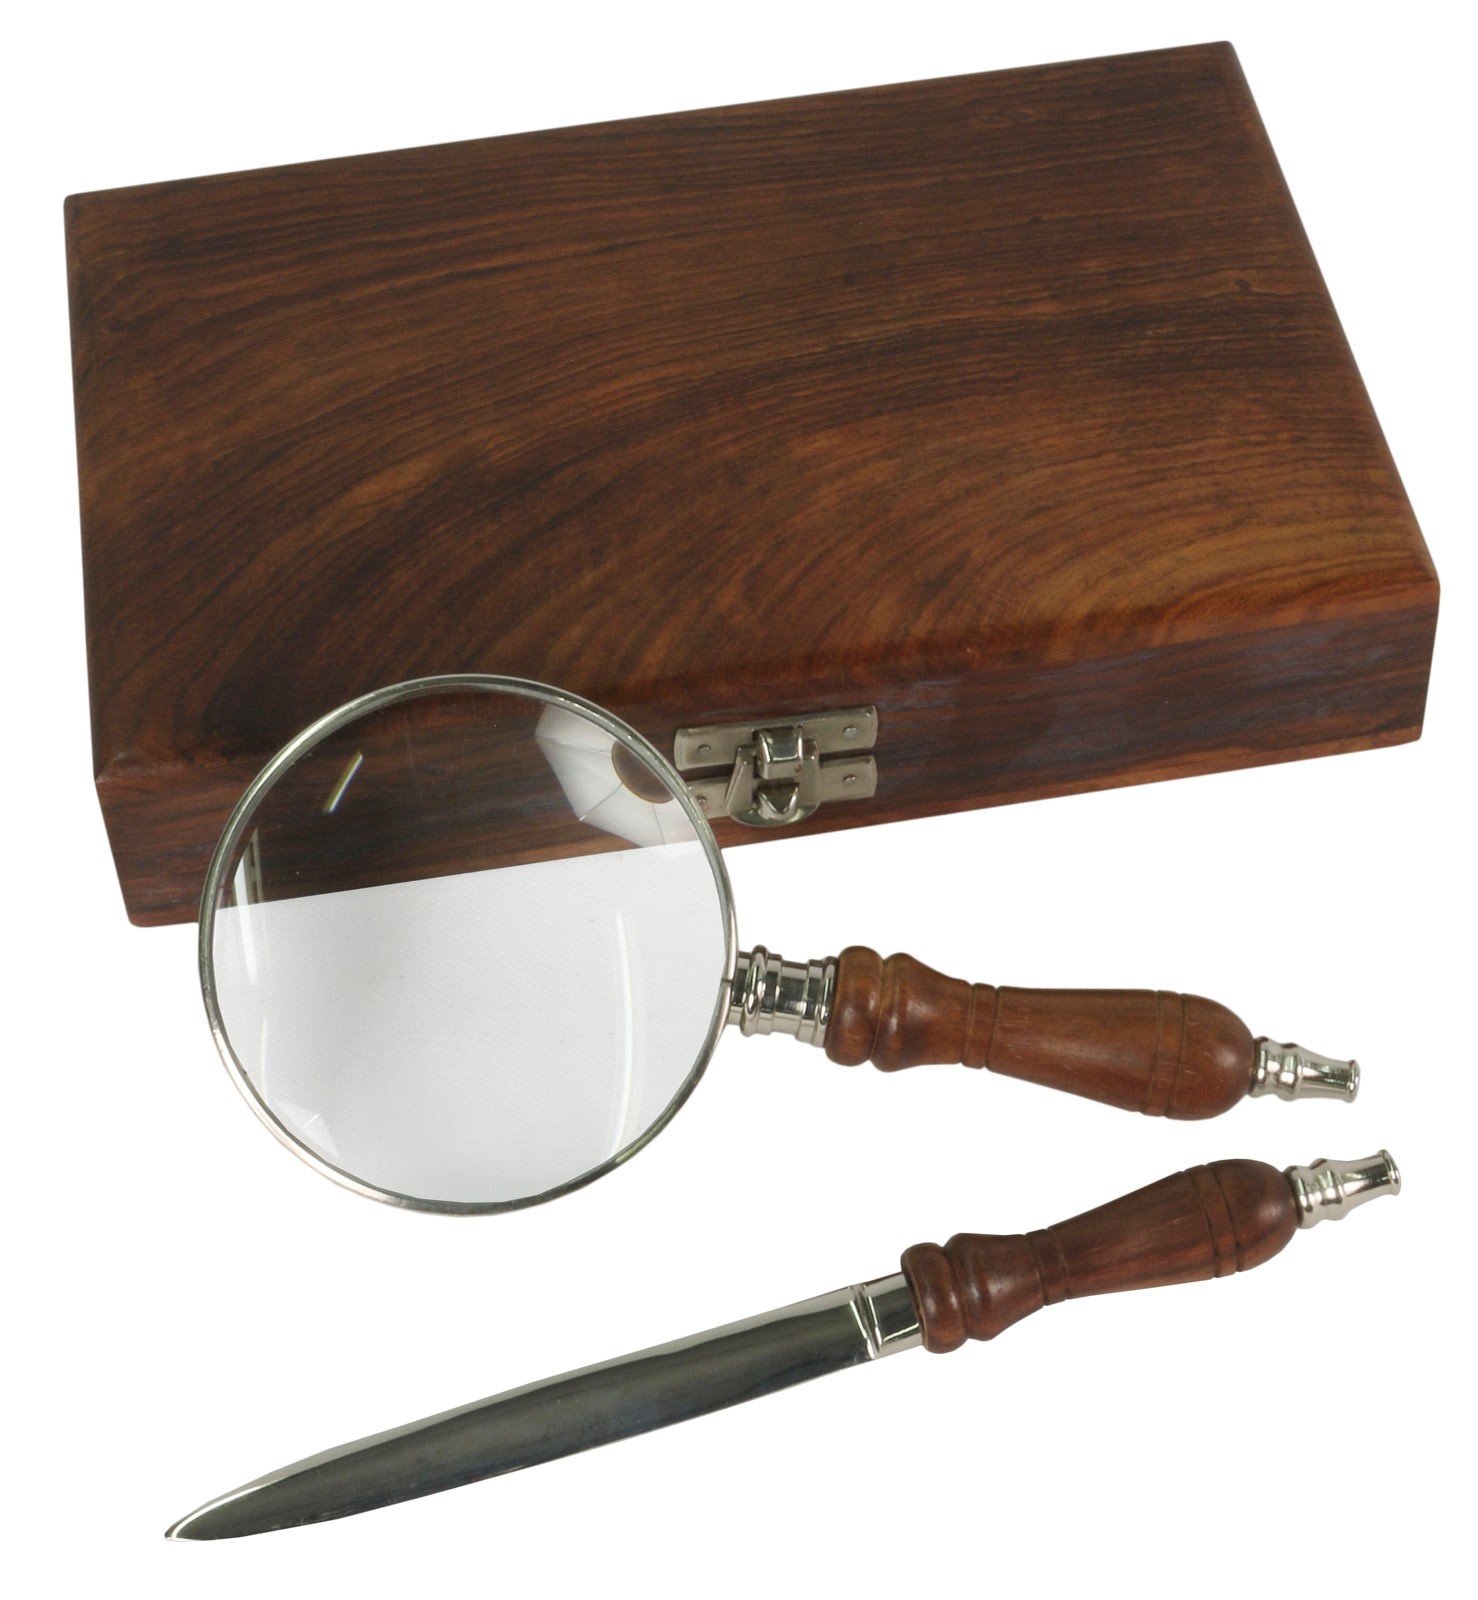 Magnifying Glass & Letter Opener with Box 21cm